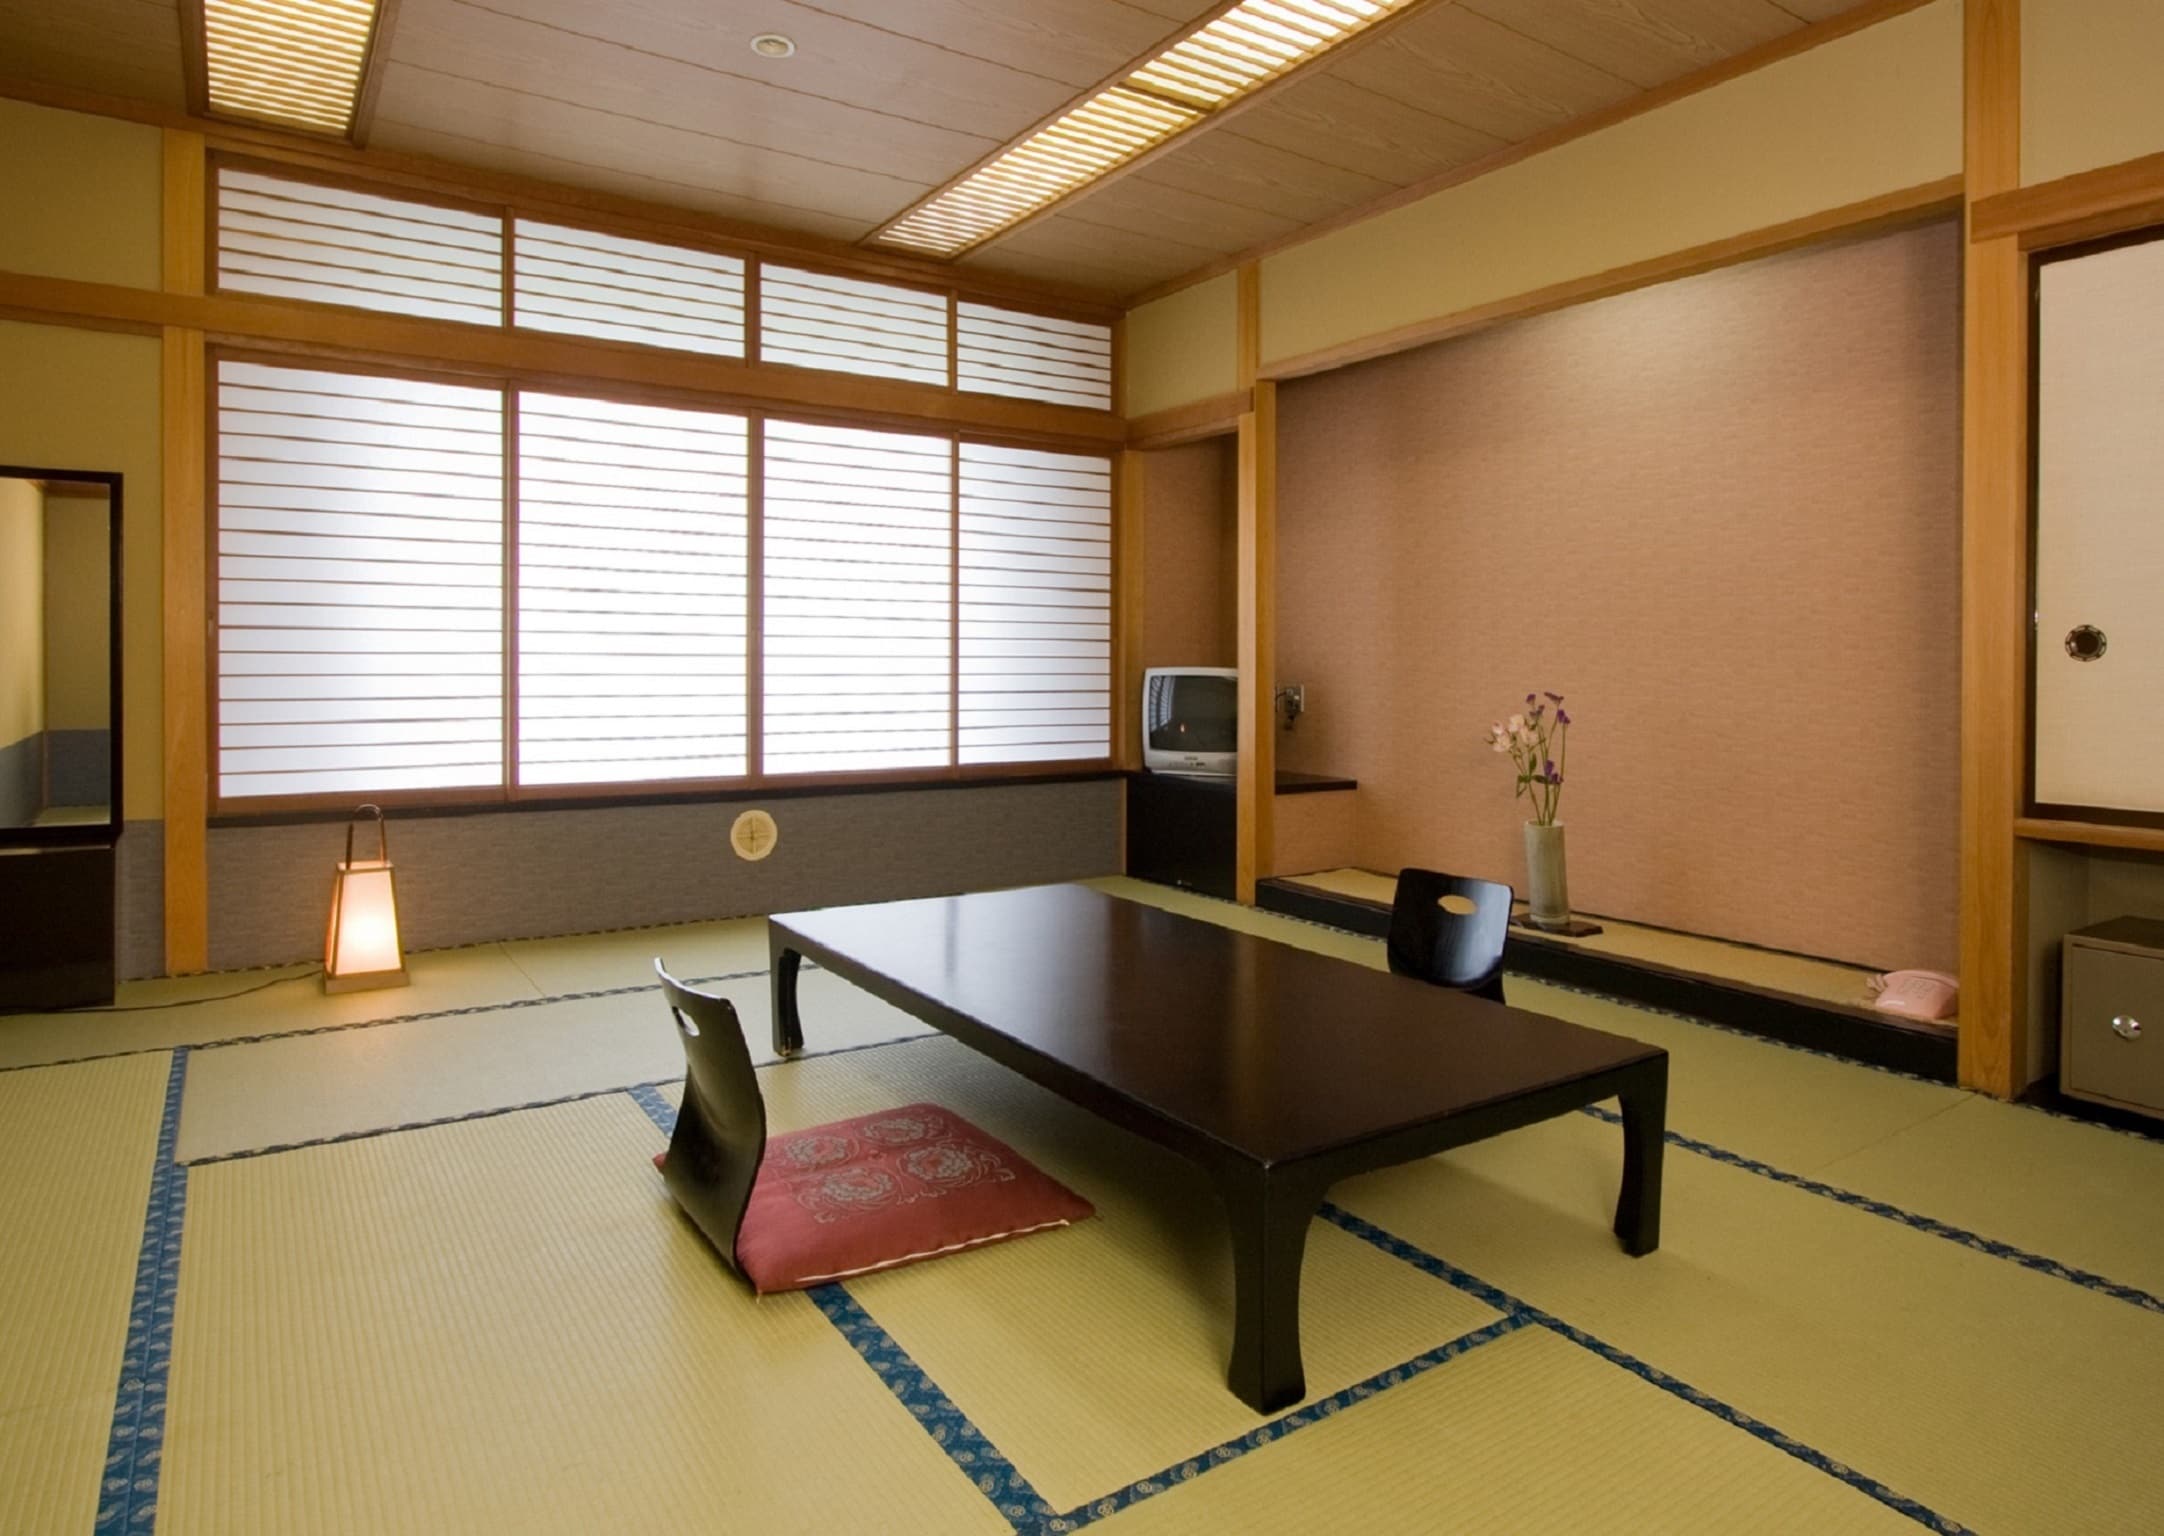 There is no bath, but it is a large room with 15 tatami mats. Recommended for large groups of guests.